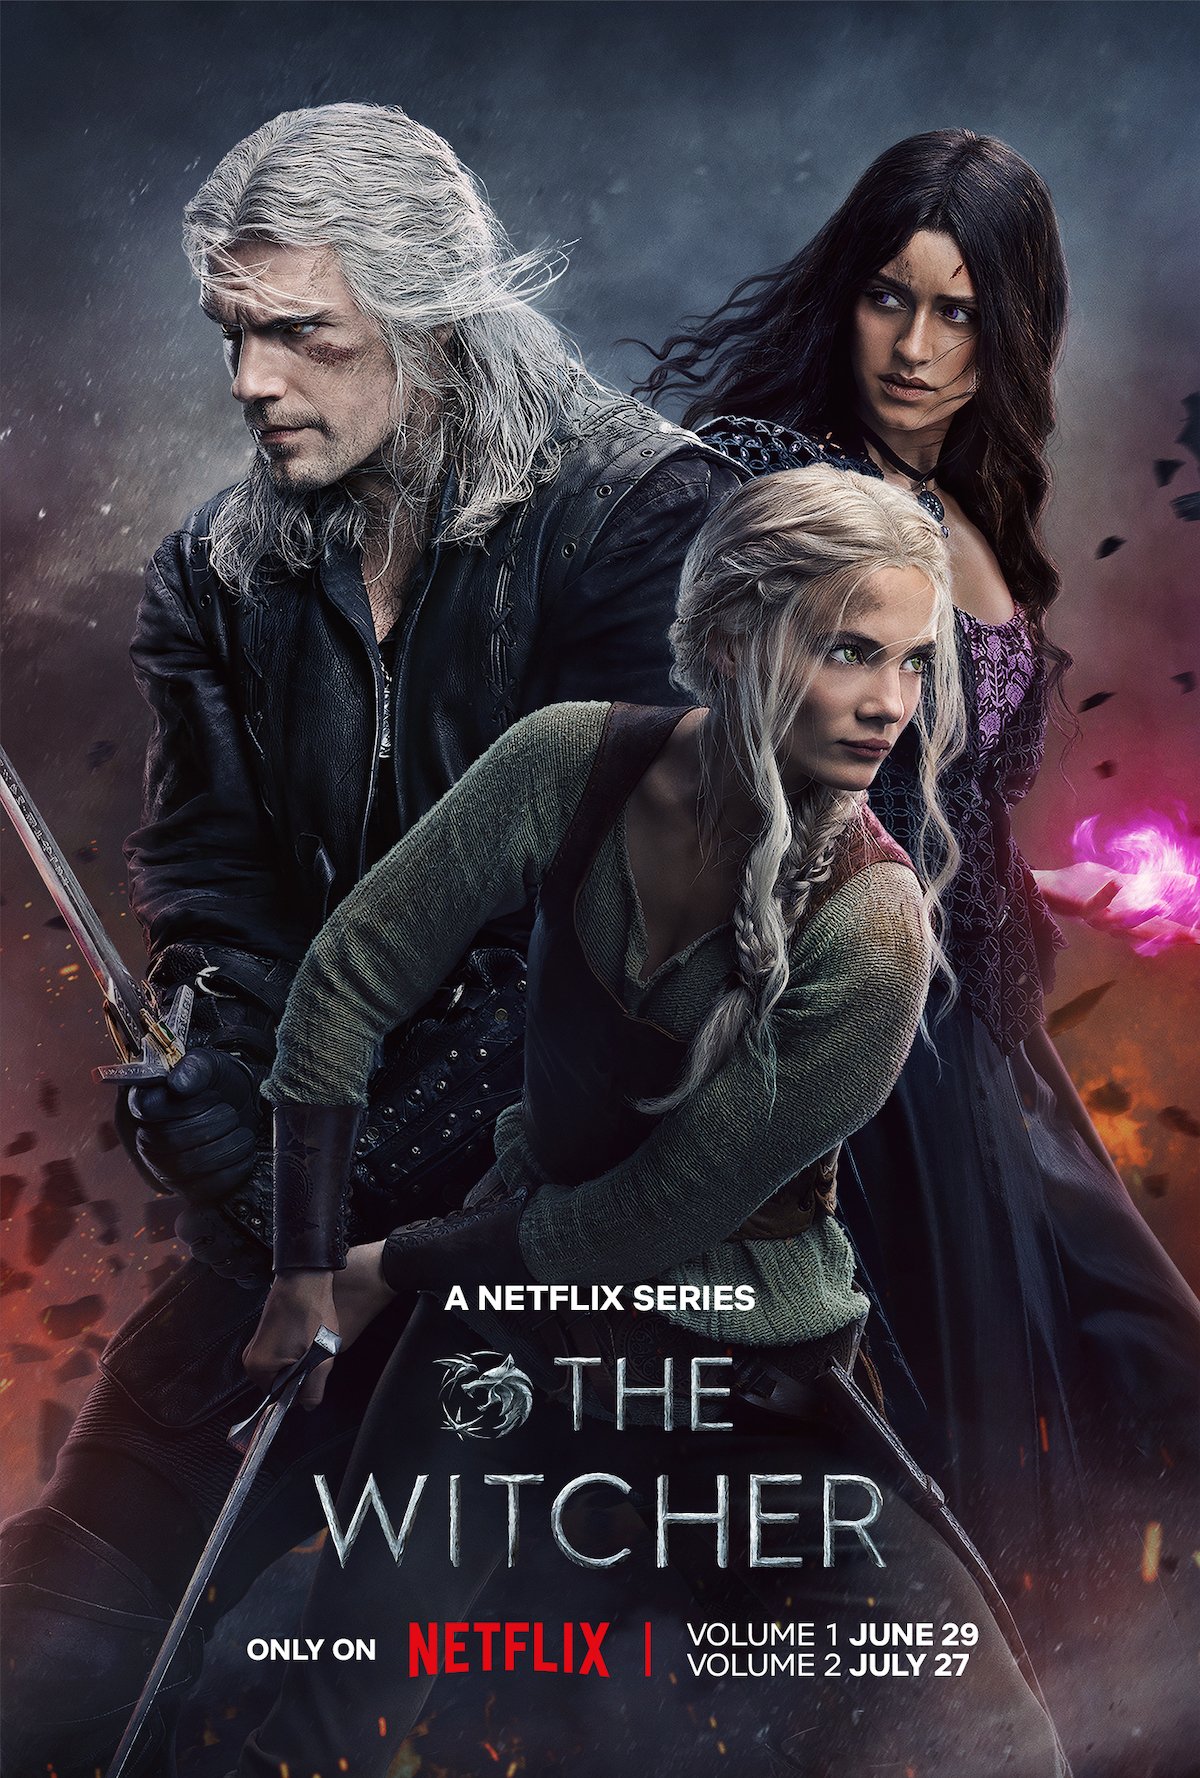 A poster for season three of The Witcher showing Geralt, Yennefer, and Ciri all posied for battle